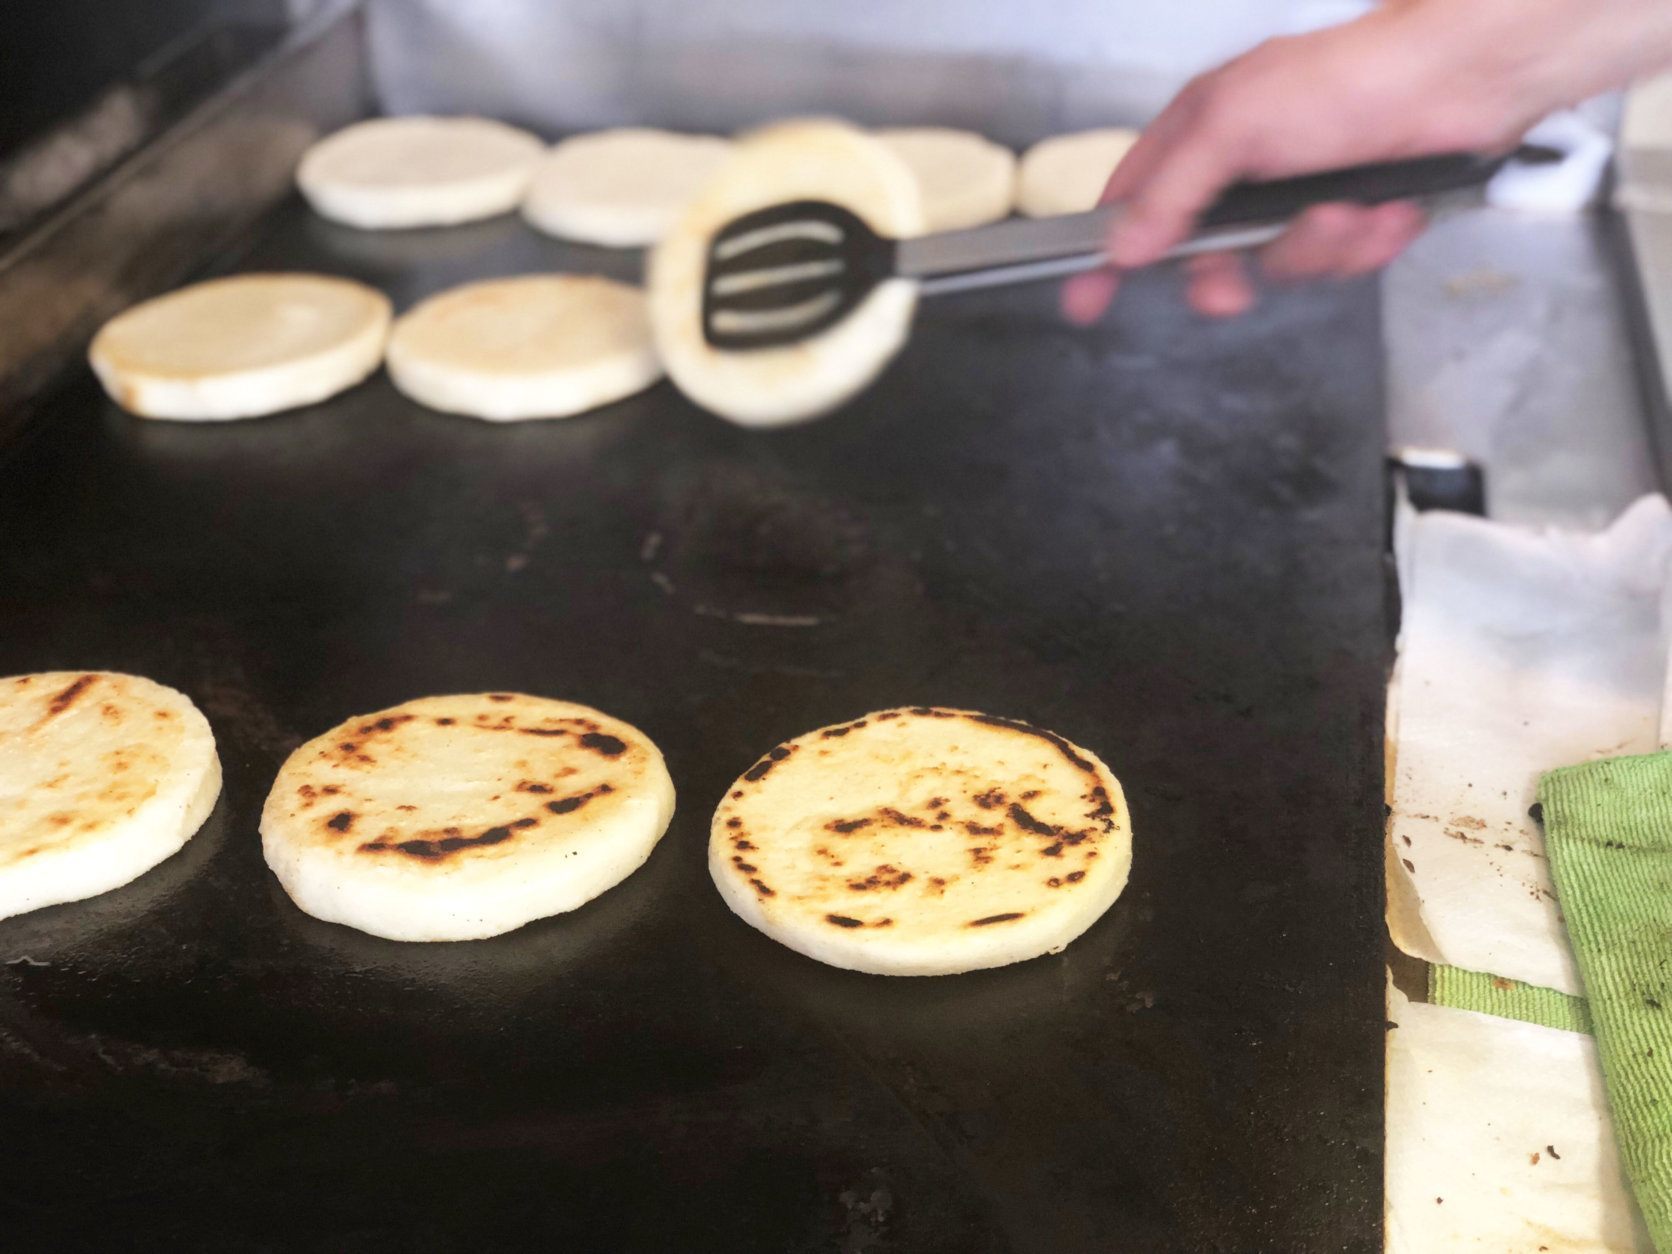 <p><span style="font-weight: 400;">It is not uncommon for </span><span style="font-weight: 400;">Gabriela Febres to catch someone weeping outside of her Venezuelan food truck, Arepa Zone. </span></p>
<p><span style="font-weight: 400;">And when Febres spots the tears, she can’t help but smile. </span></p>
<p><span style="font-weight: 400;">“I think I read somewhere that food, or just flavors in general, are the biggest trigger for memories. So when people come and they say, ‘Oh my gosh this tastes like my grandmother’s food,’ that means the world,” said Febres, who launched the business in 2014 with </span><span style="font-weight: 400;">Ali Arellano. </span></p>
